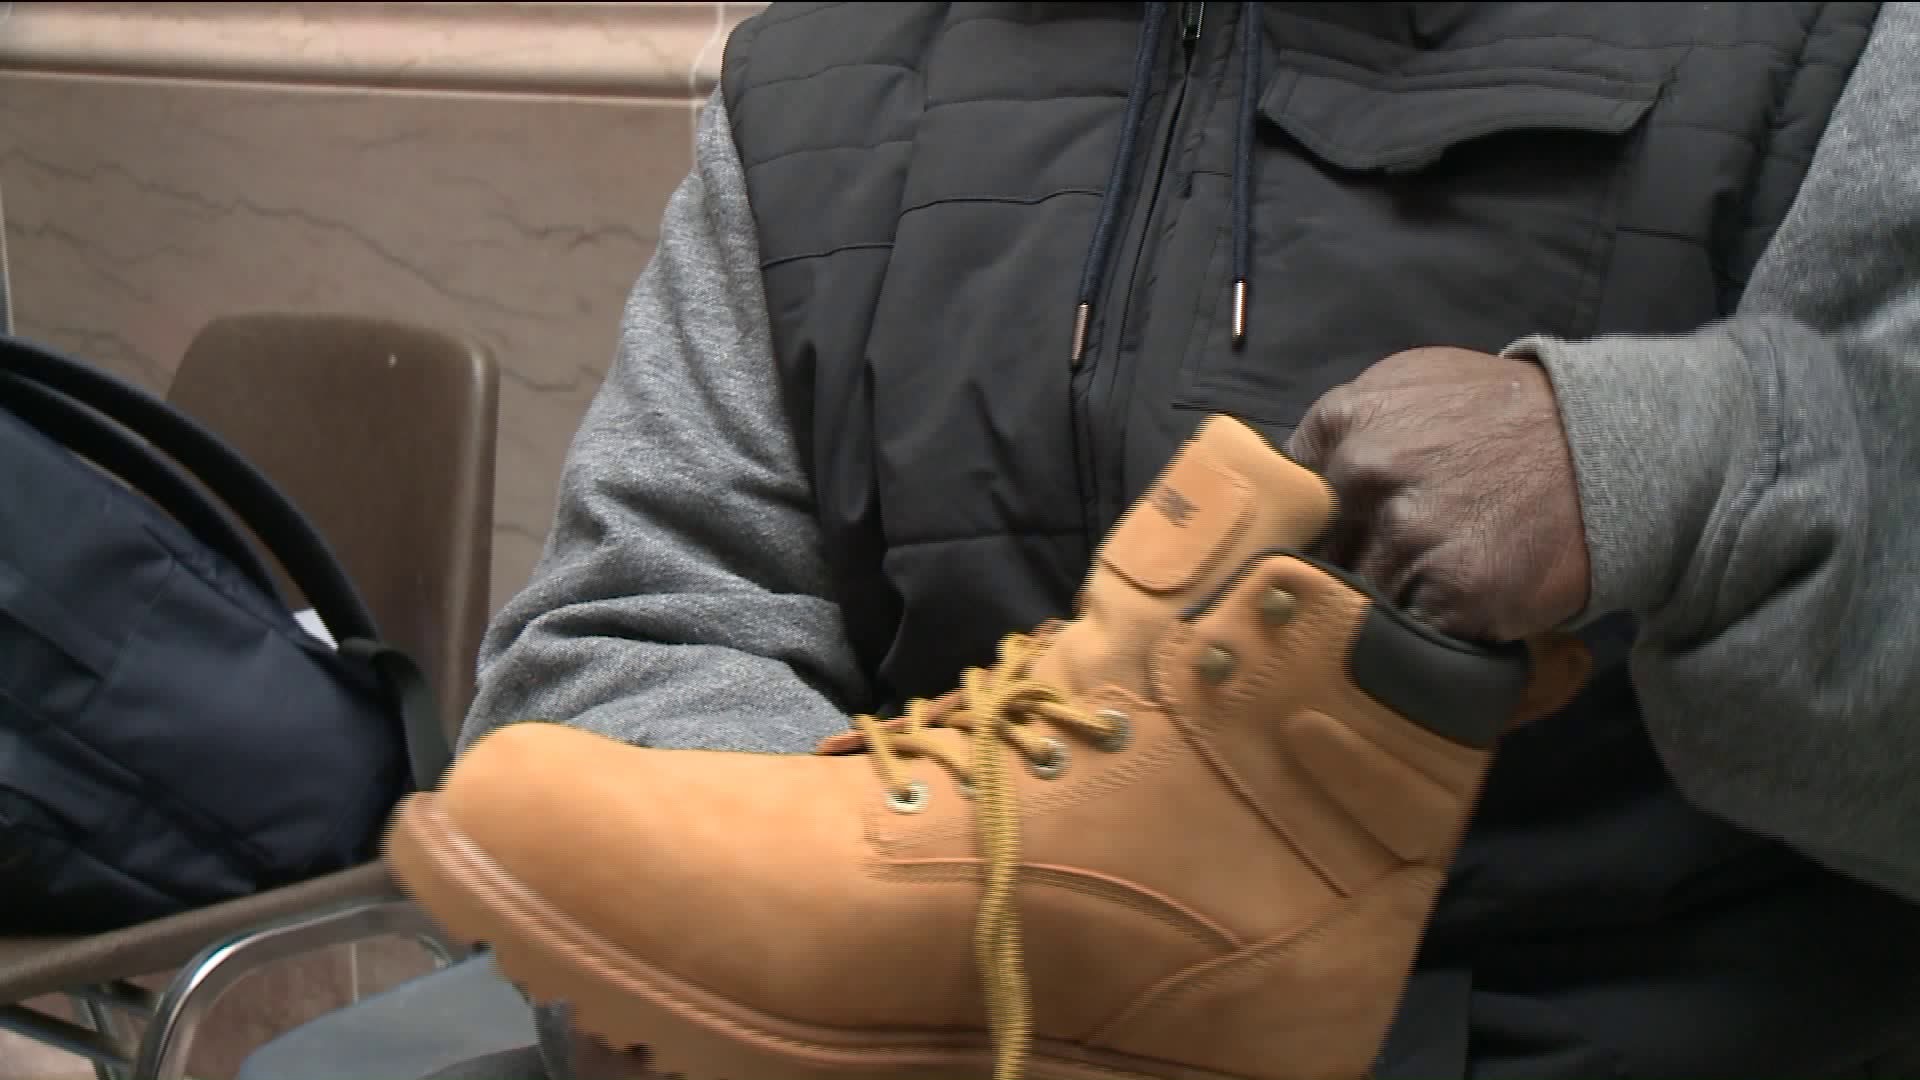 Volunteers hand out winter boots at the Hartford Winter Boot Party